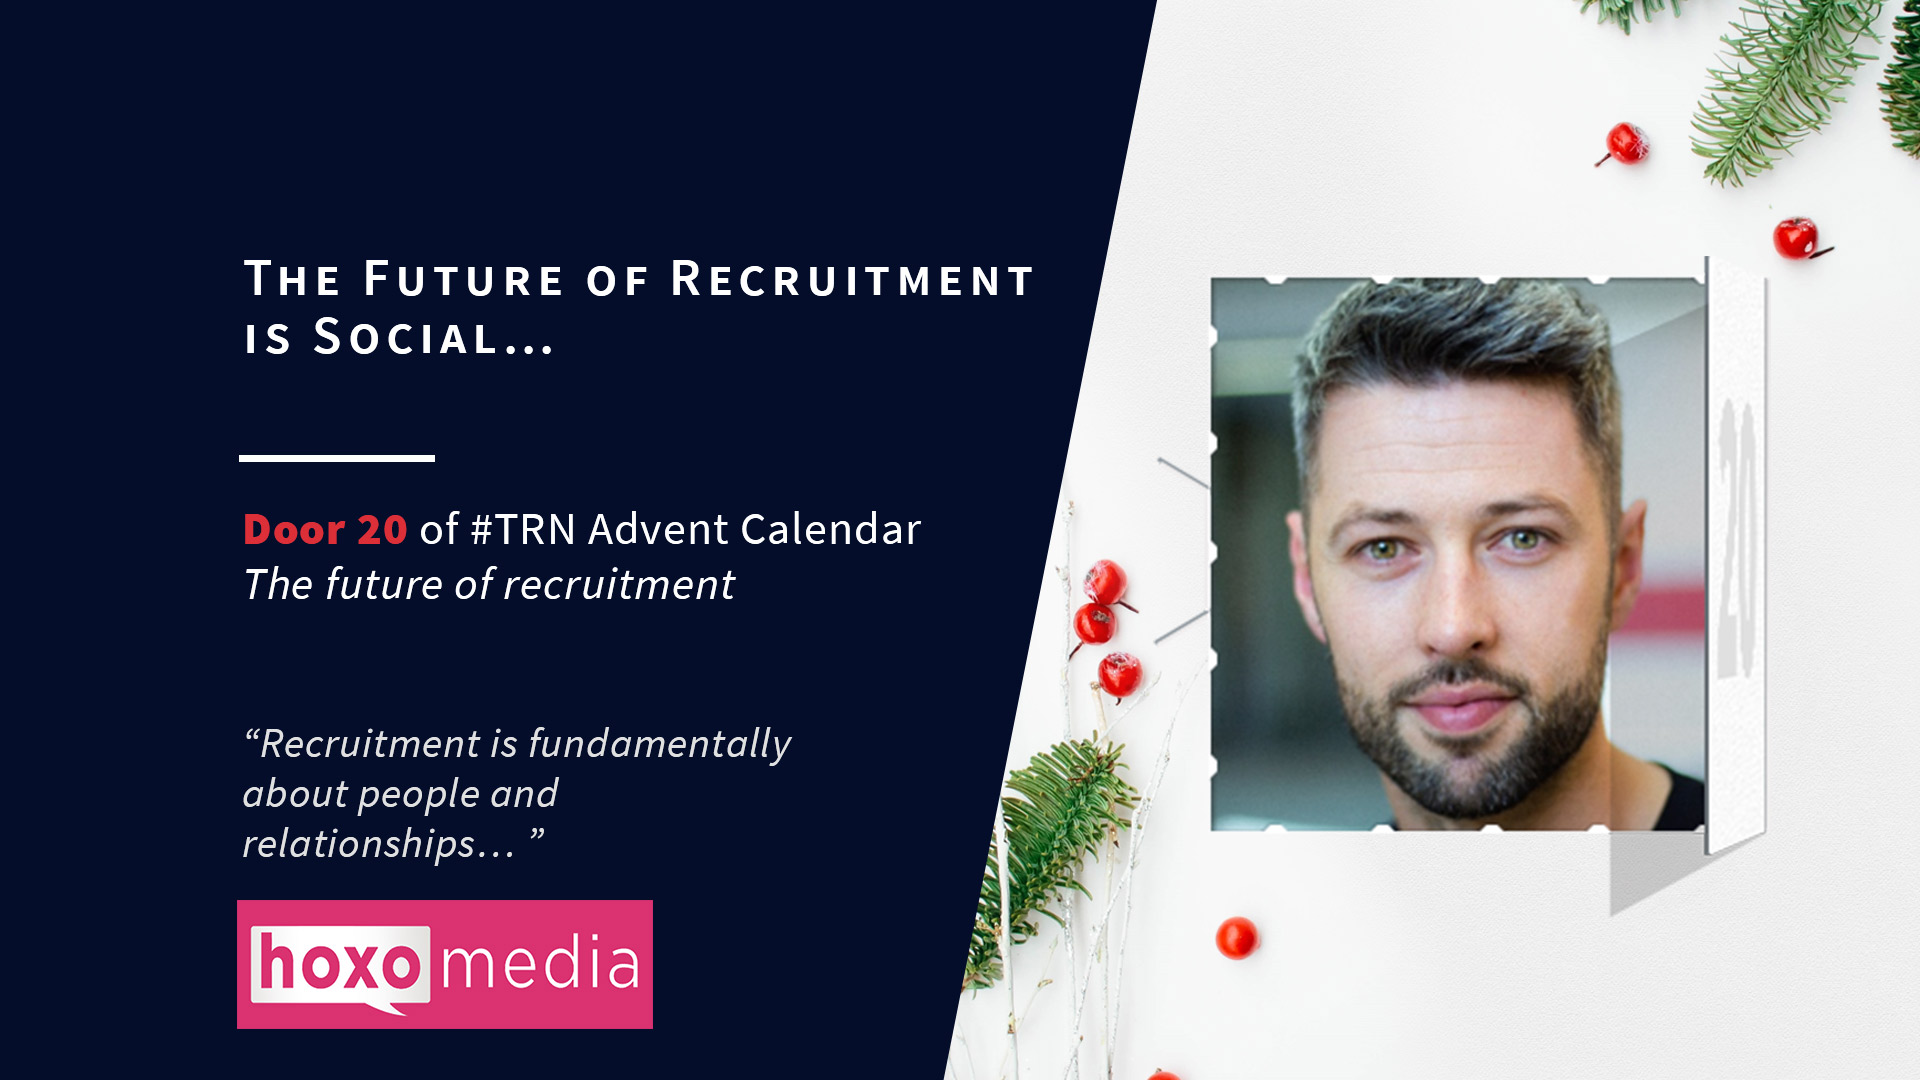 The Future of Recruitment is Social with Sean Anderson